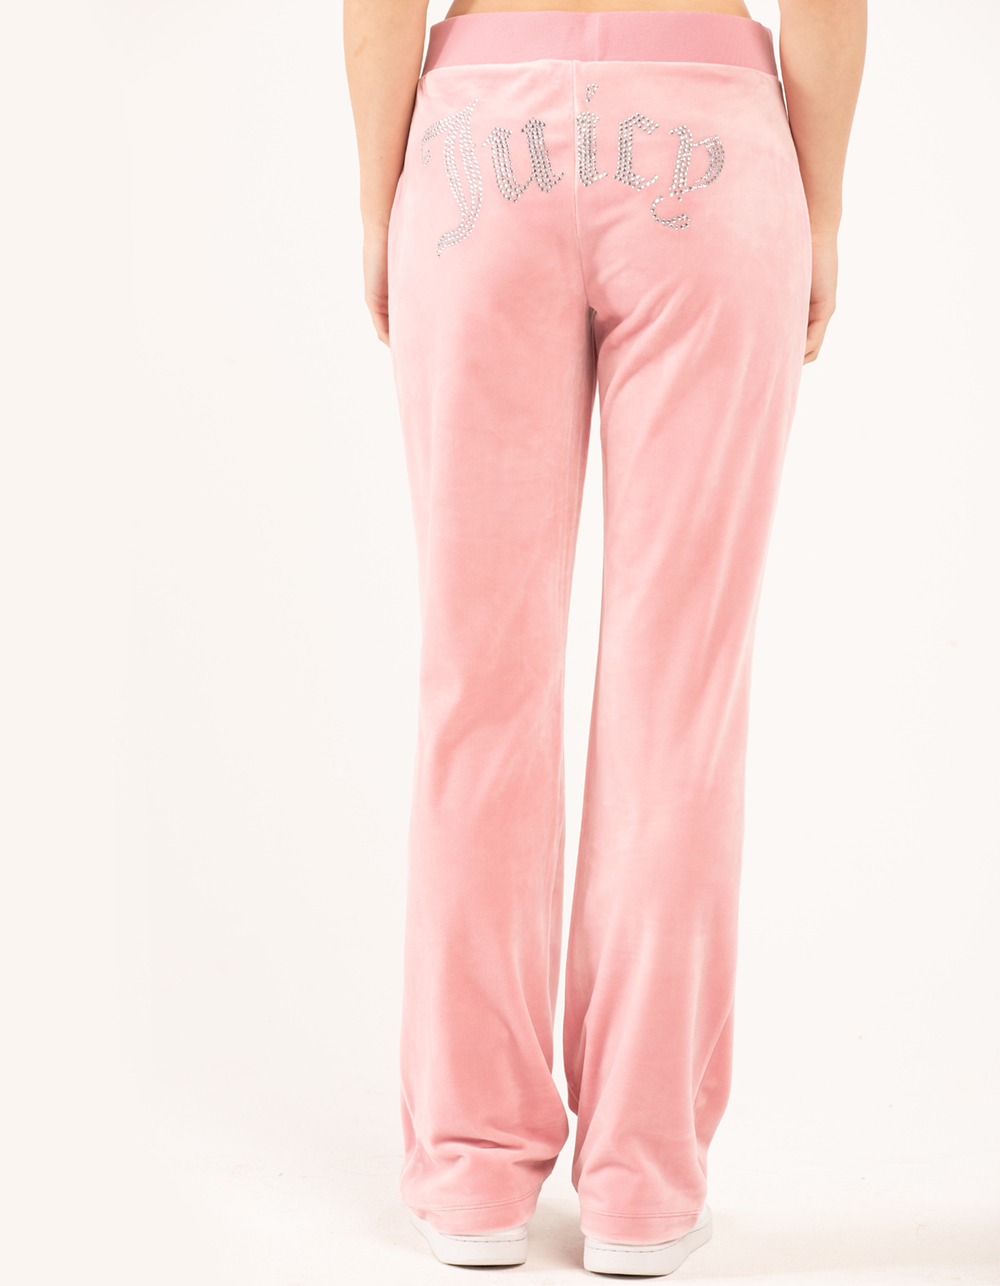 JUICY COUTURE OG Bling Womens Pants - ROSE | Tillys